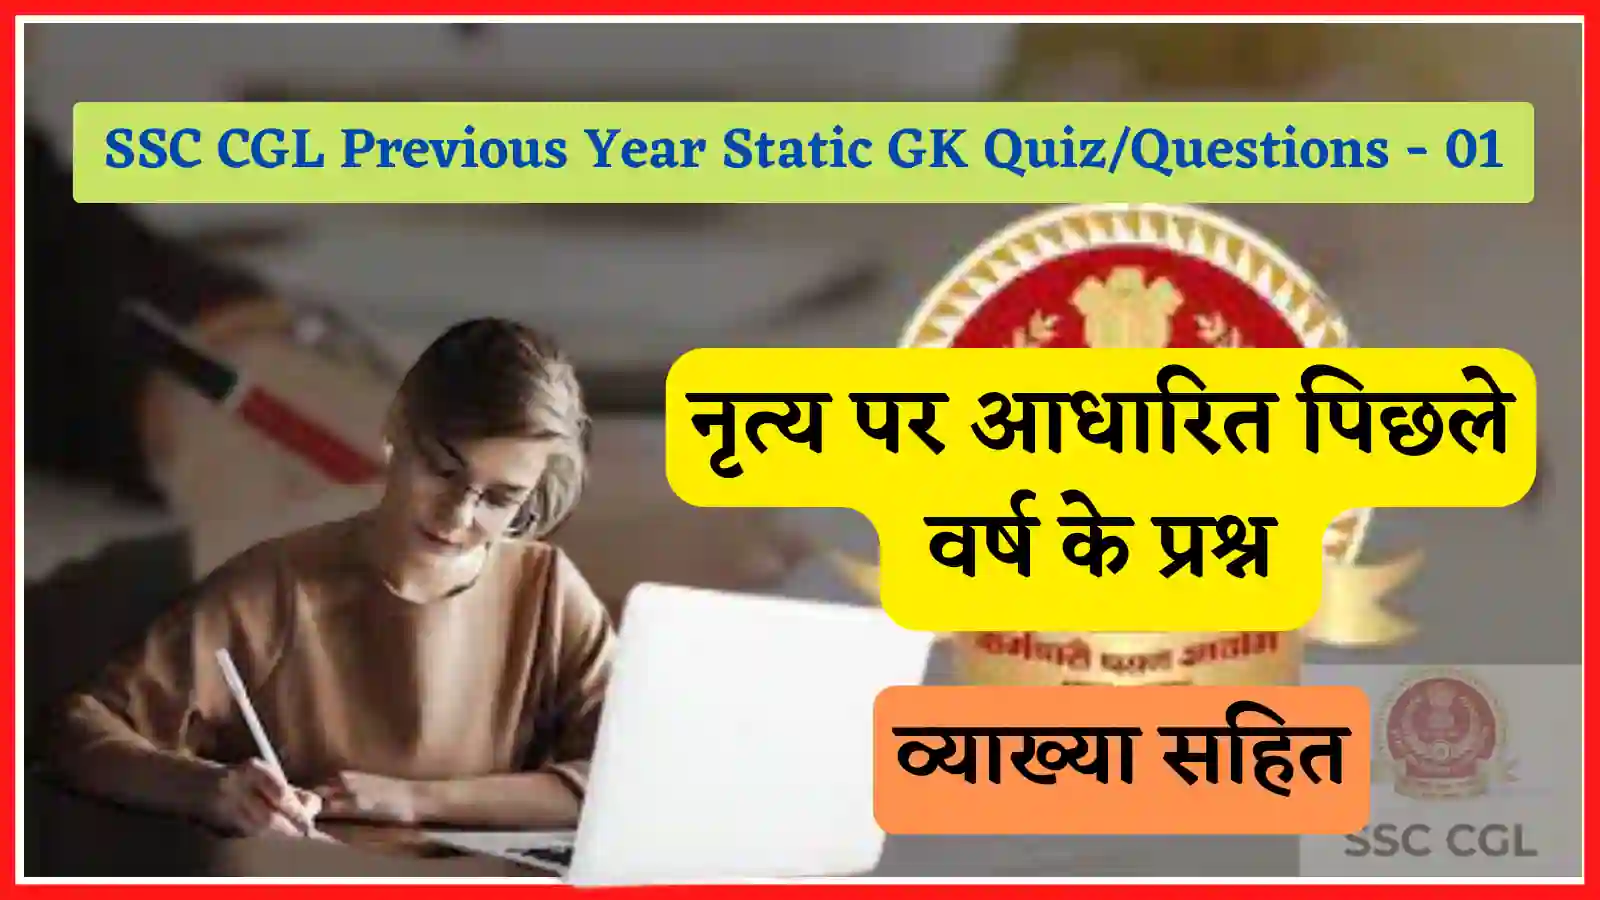  SSC CGL Previous Year Static GK Quiz/Questions - 01 